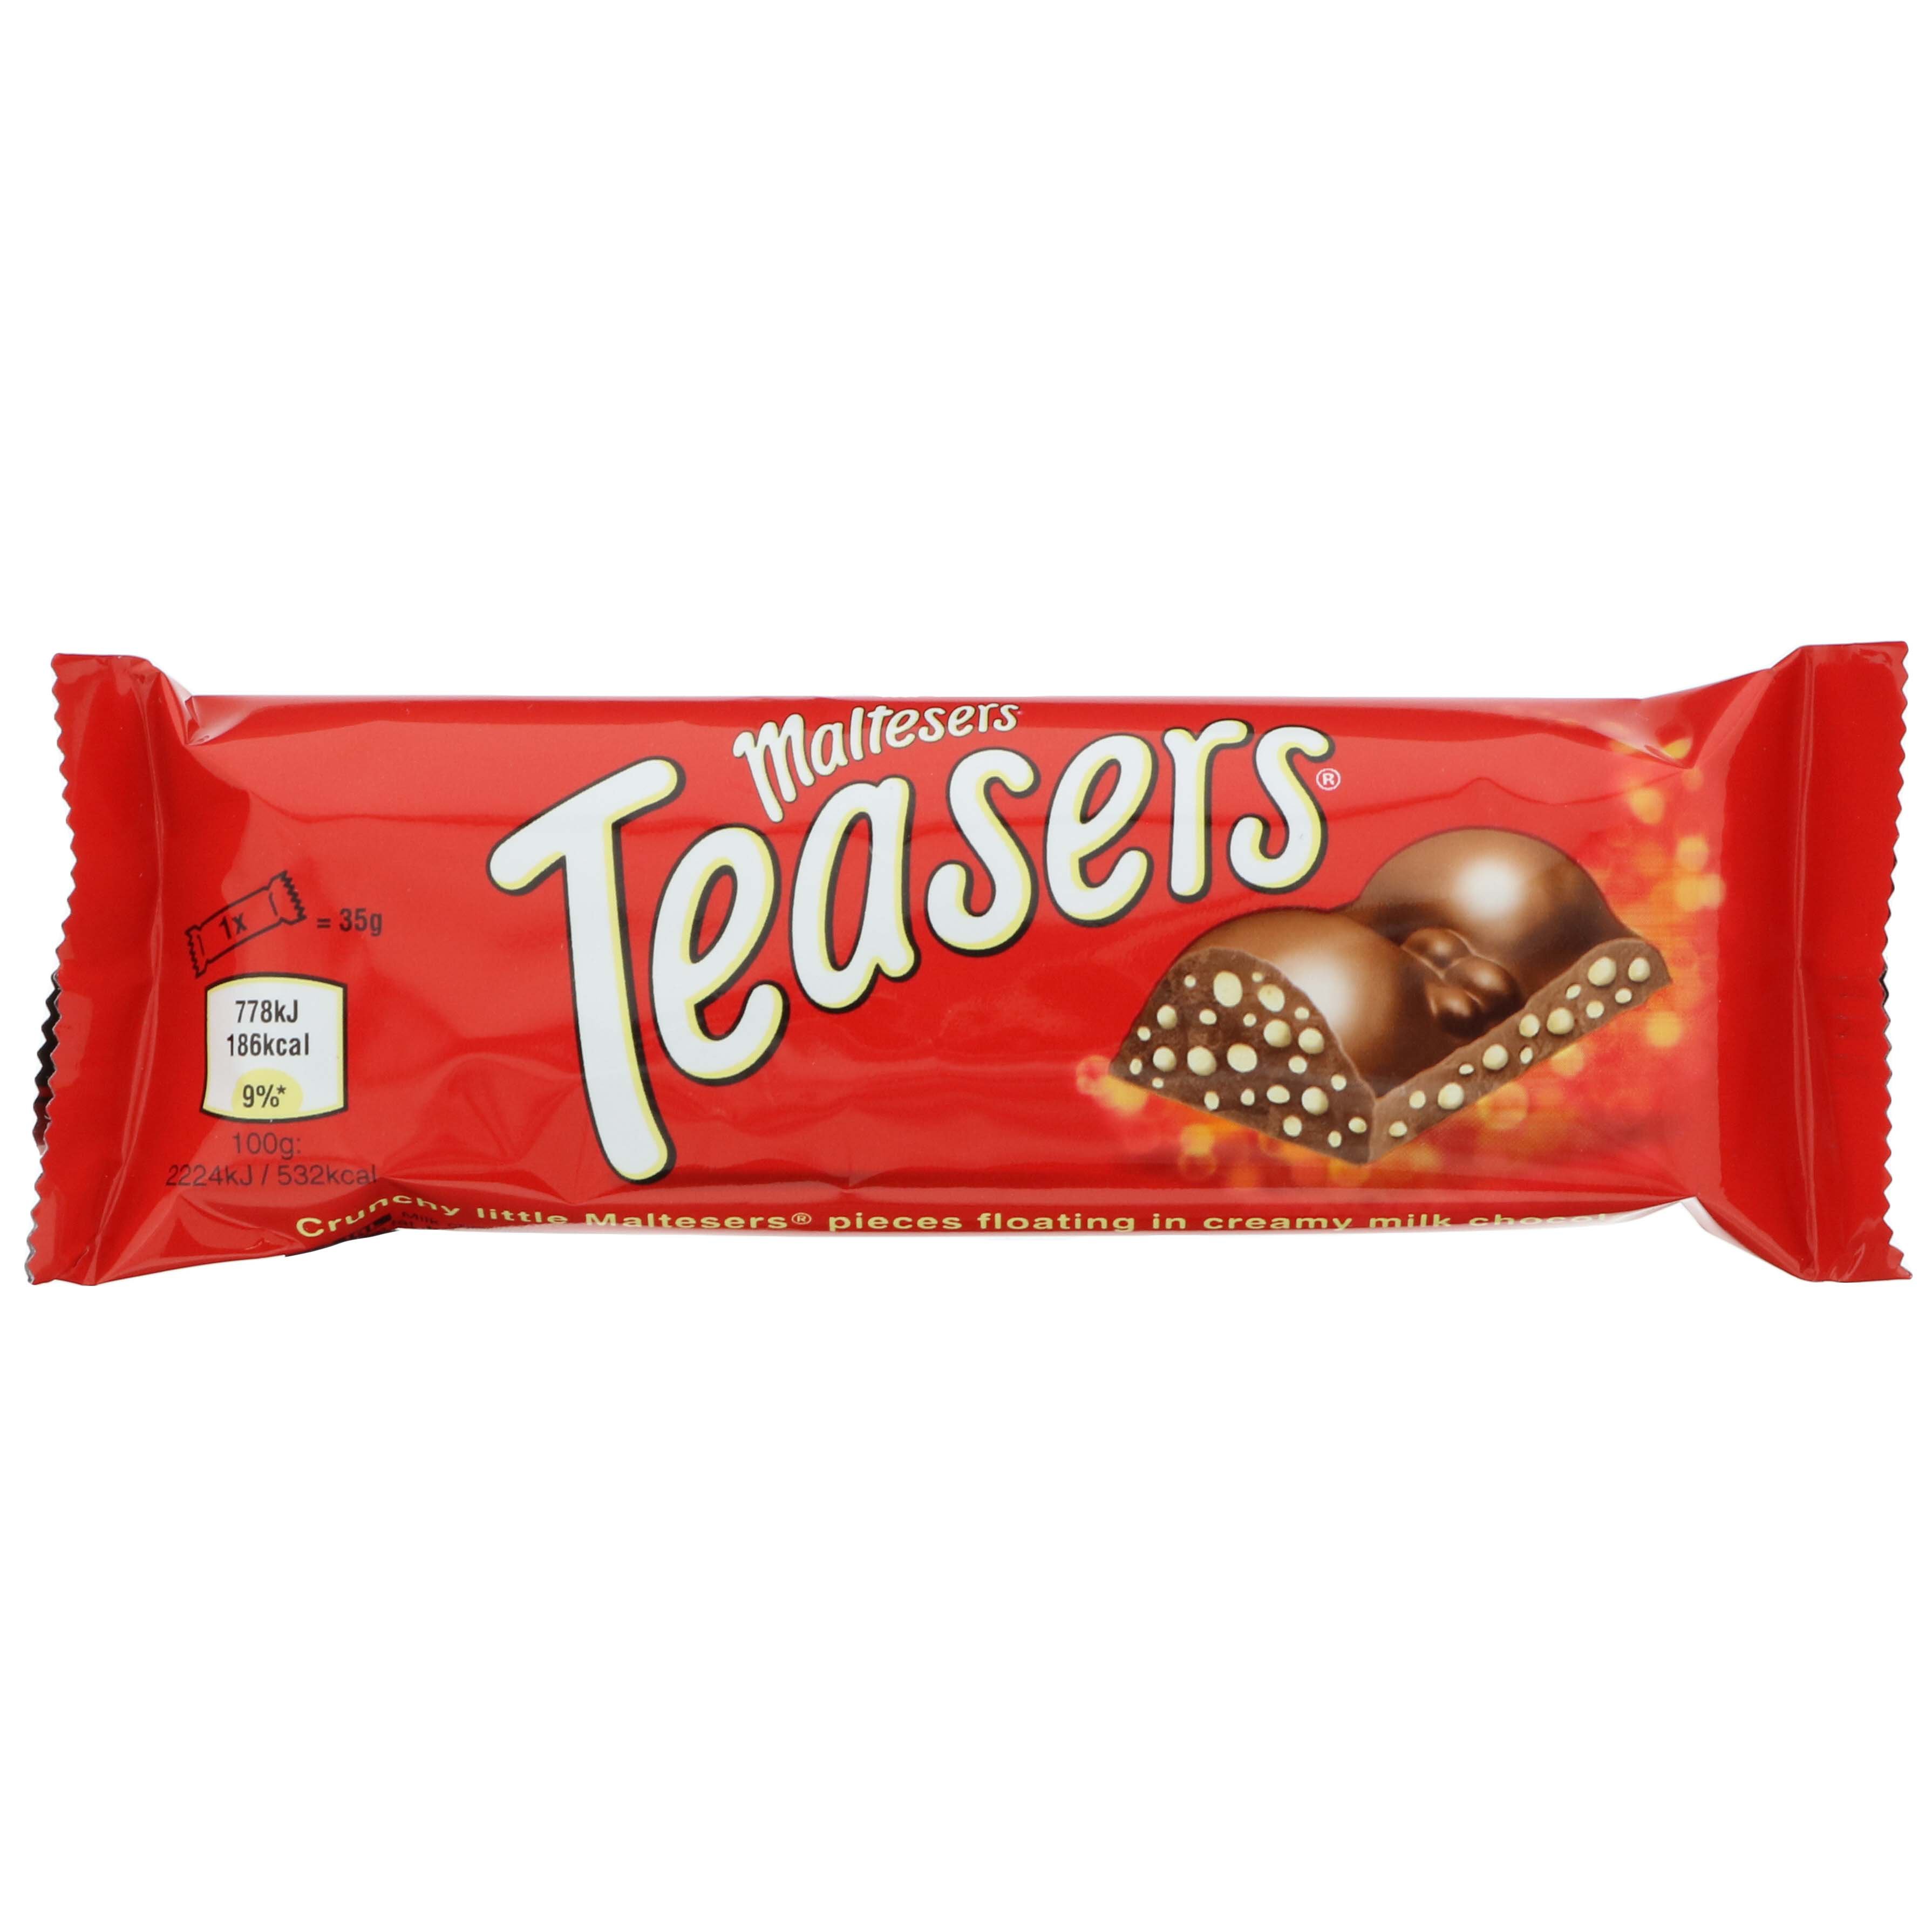 Mars Maltesers Teasers - Shop Candy at H-E-B